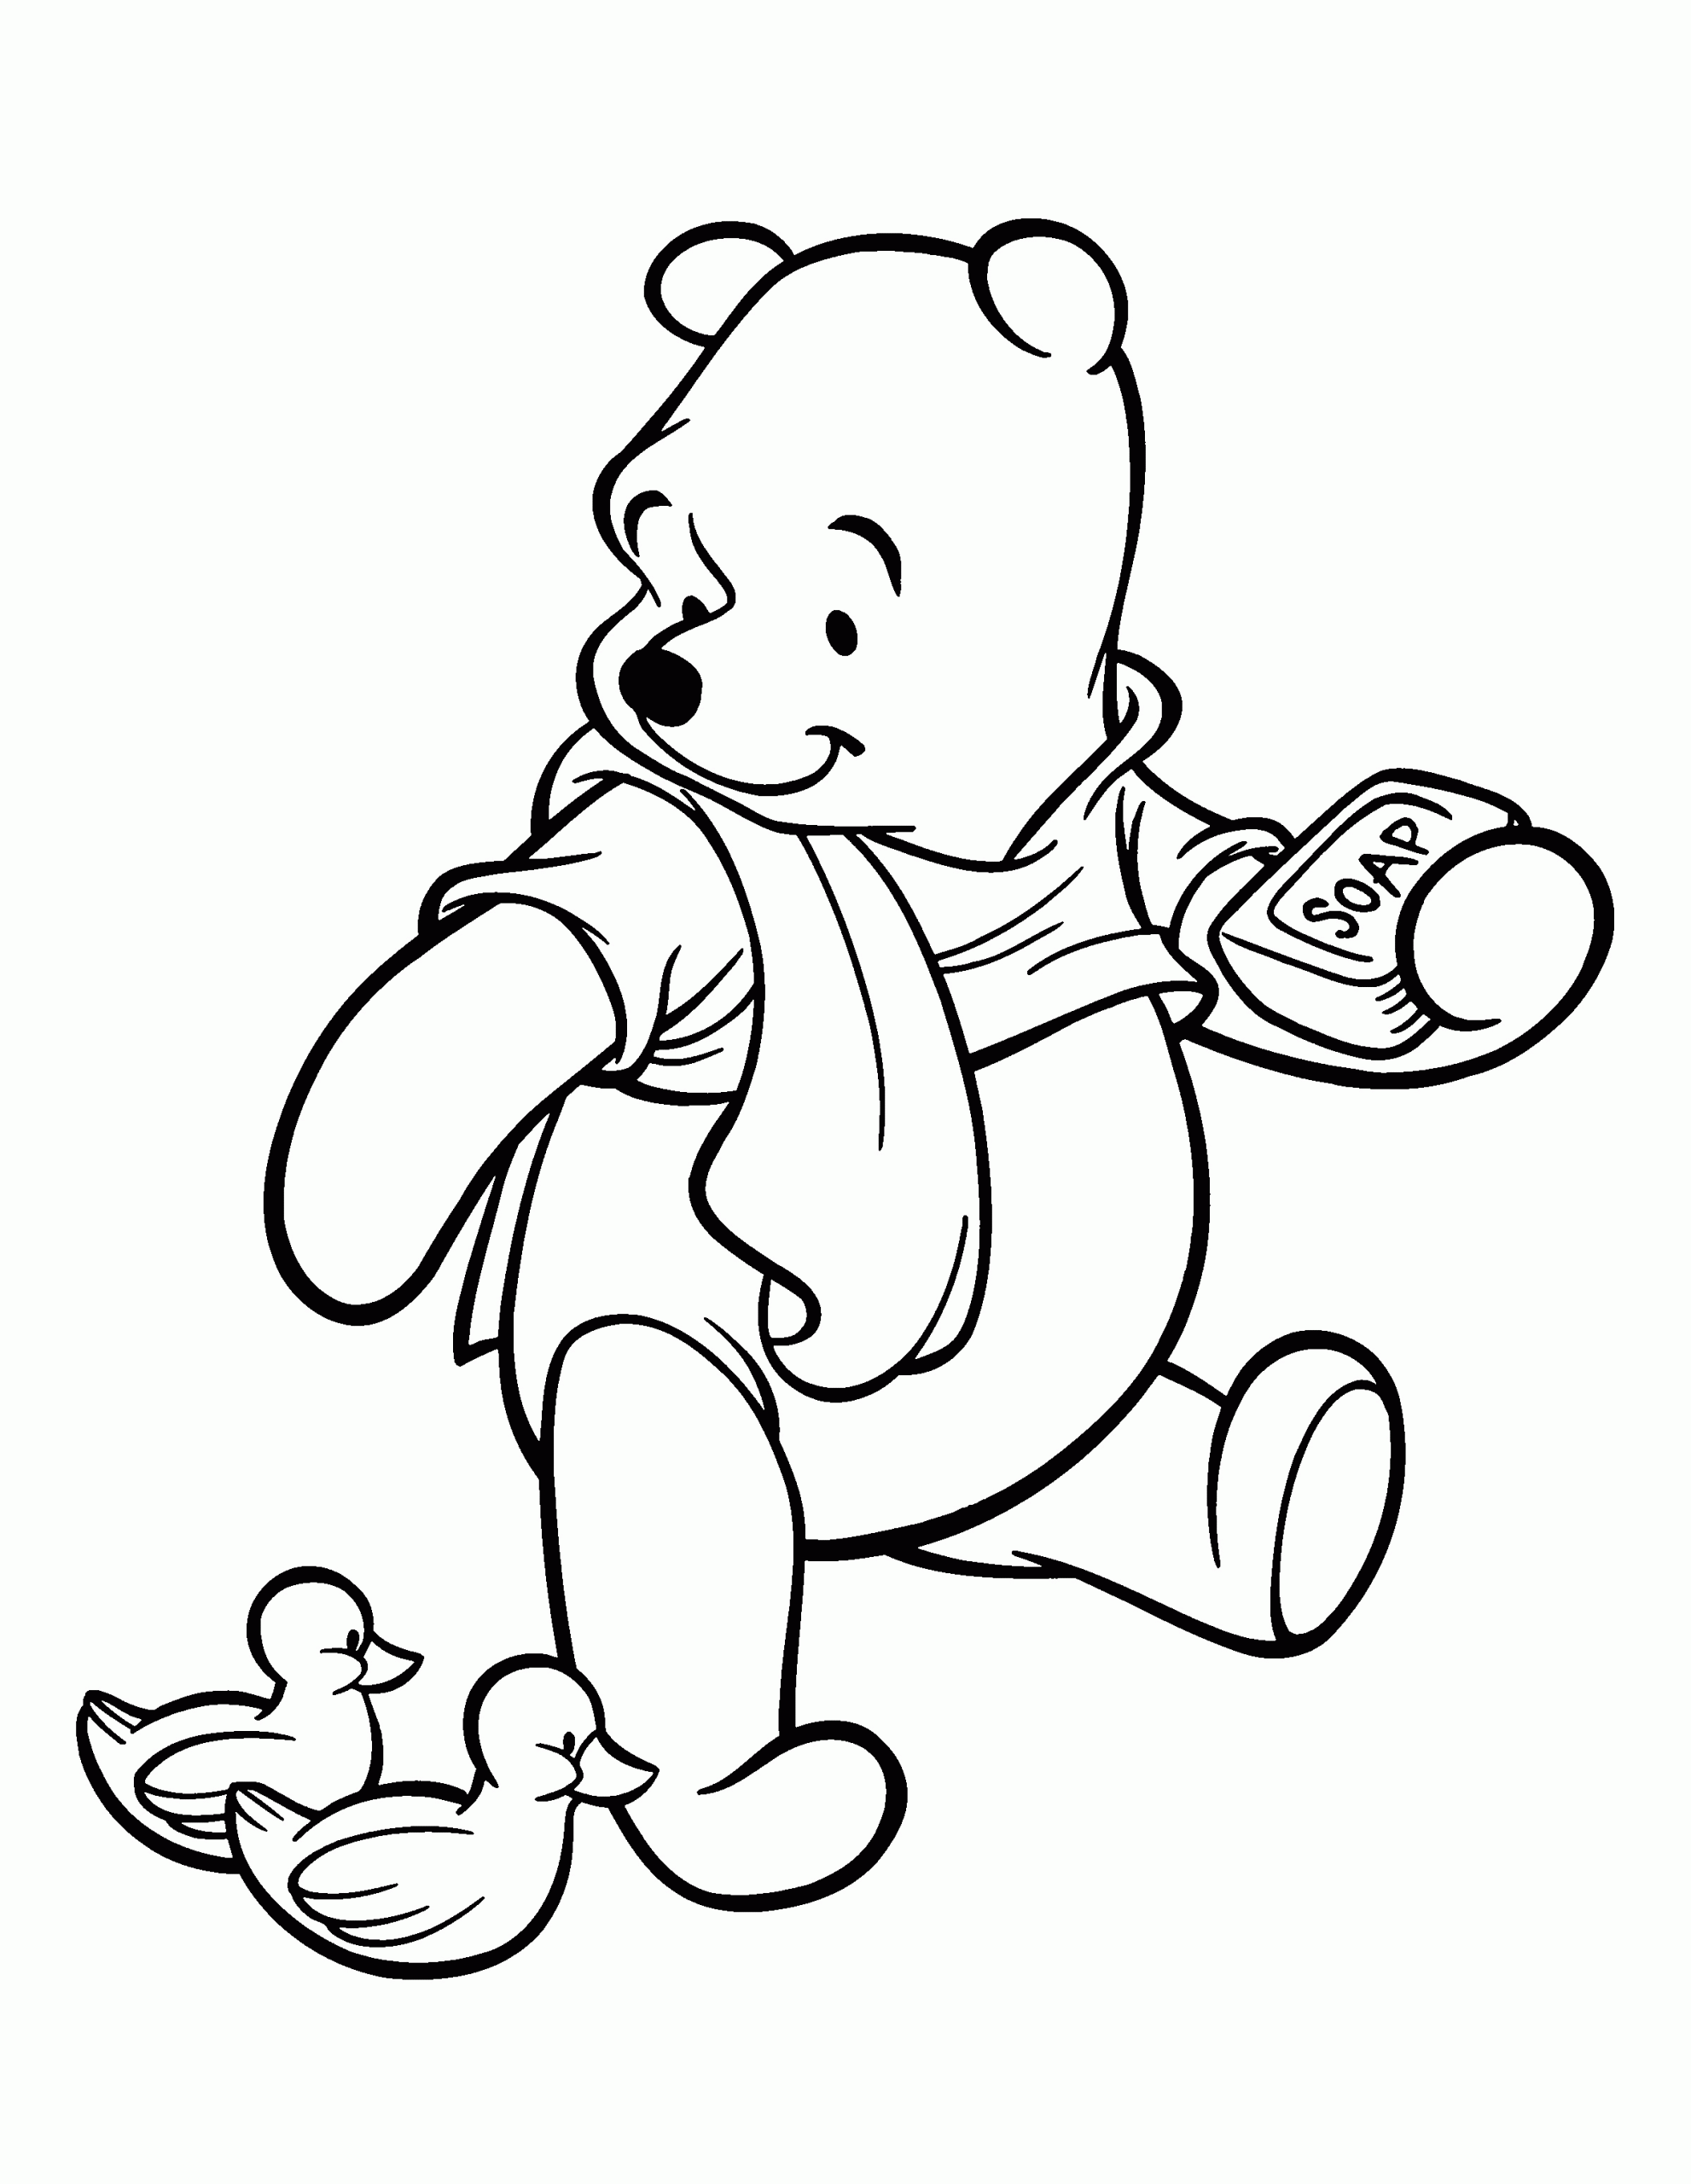 Kids Coloring Pages Disney
 Free Printable Winnie The Pooh Coloring Pages For Kids